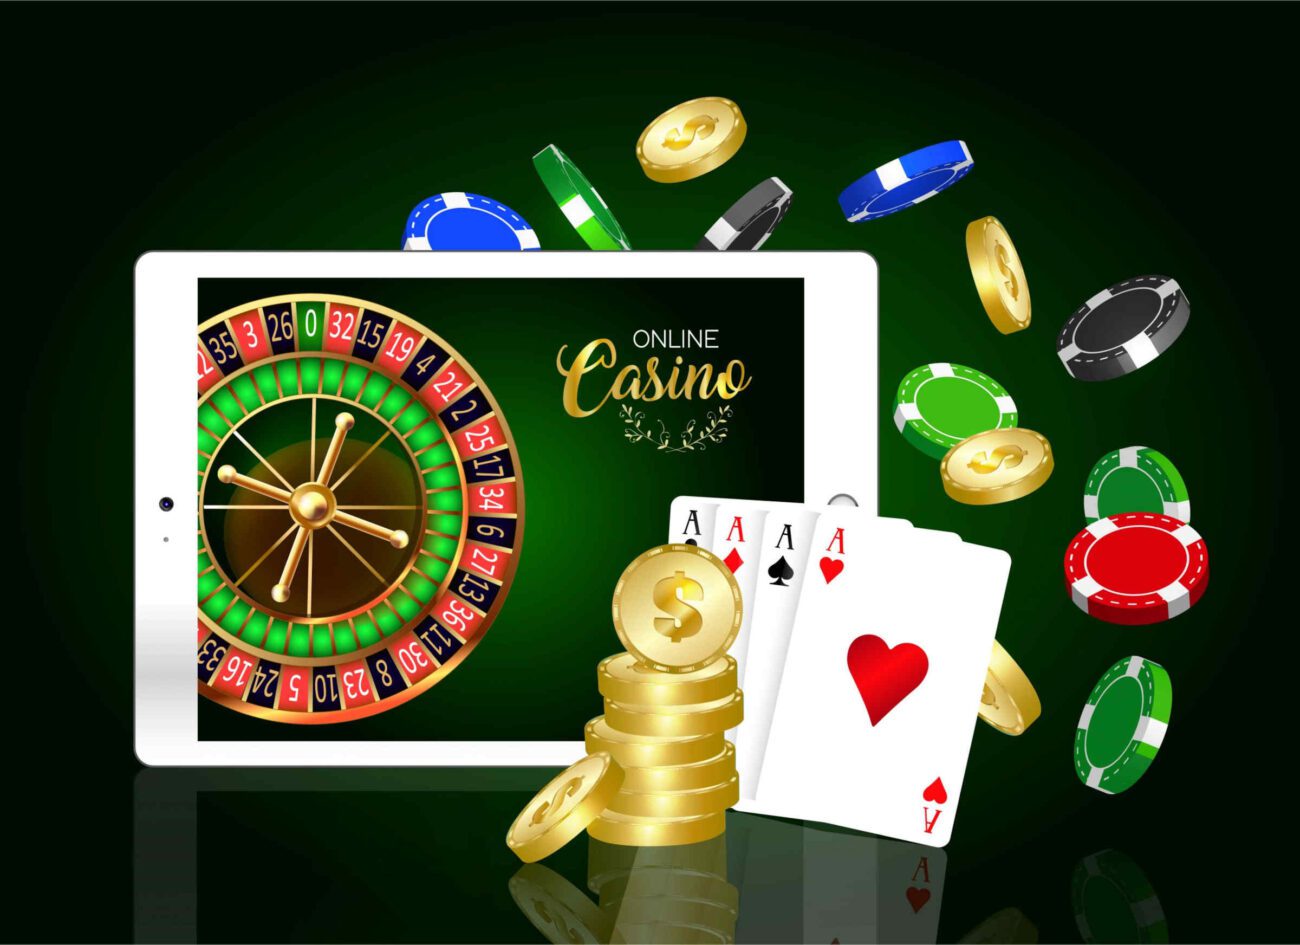 Our experts will analyze the concepts of an online casino with fast payouts. You will learn about the best fast withdrawal methods in Canada.